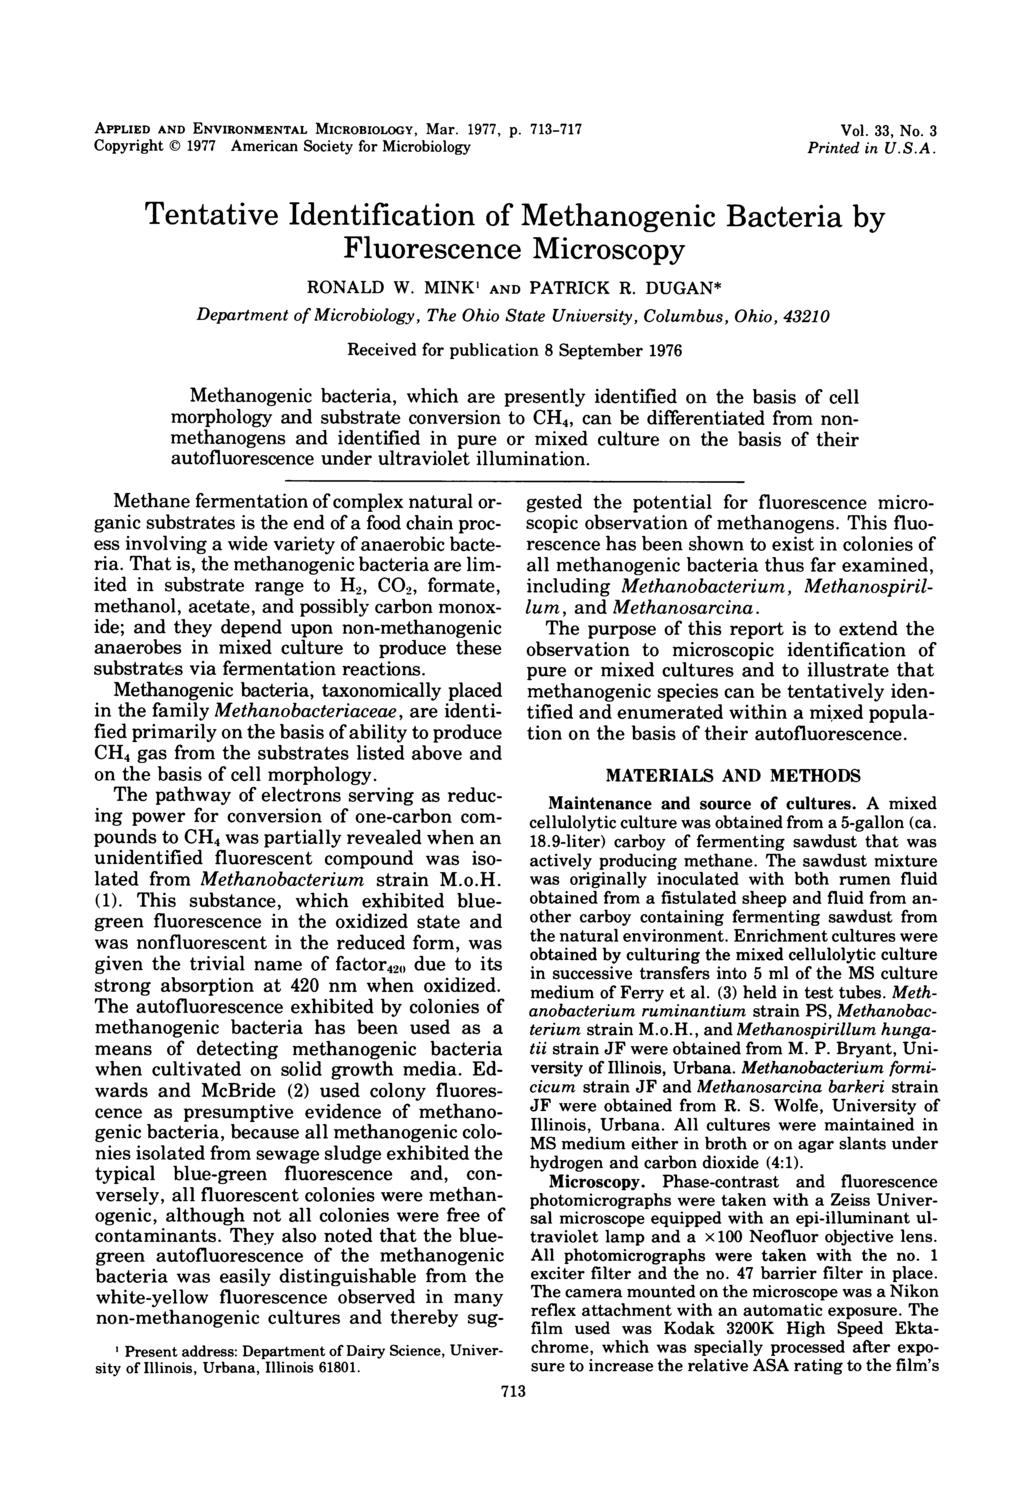 APPLIED AND ENVIRONMENTAL MICROBIOLOGY, Mar. 1977, p. 713-717 Copyright (C 1977 American Society for Microbiology Vol. 33, No. 3 Printed in U.S.A. Tentative Identification of Methanogenic Bacteria by Fluorescence Microscopy RONALD W.